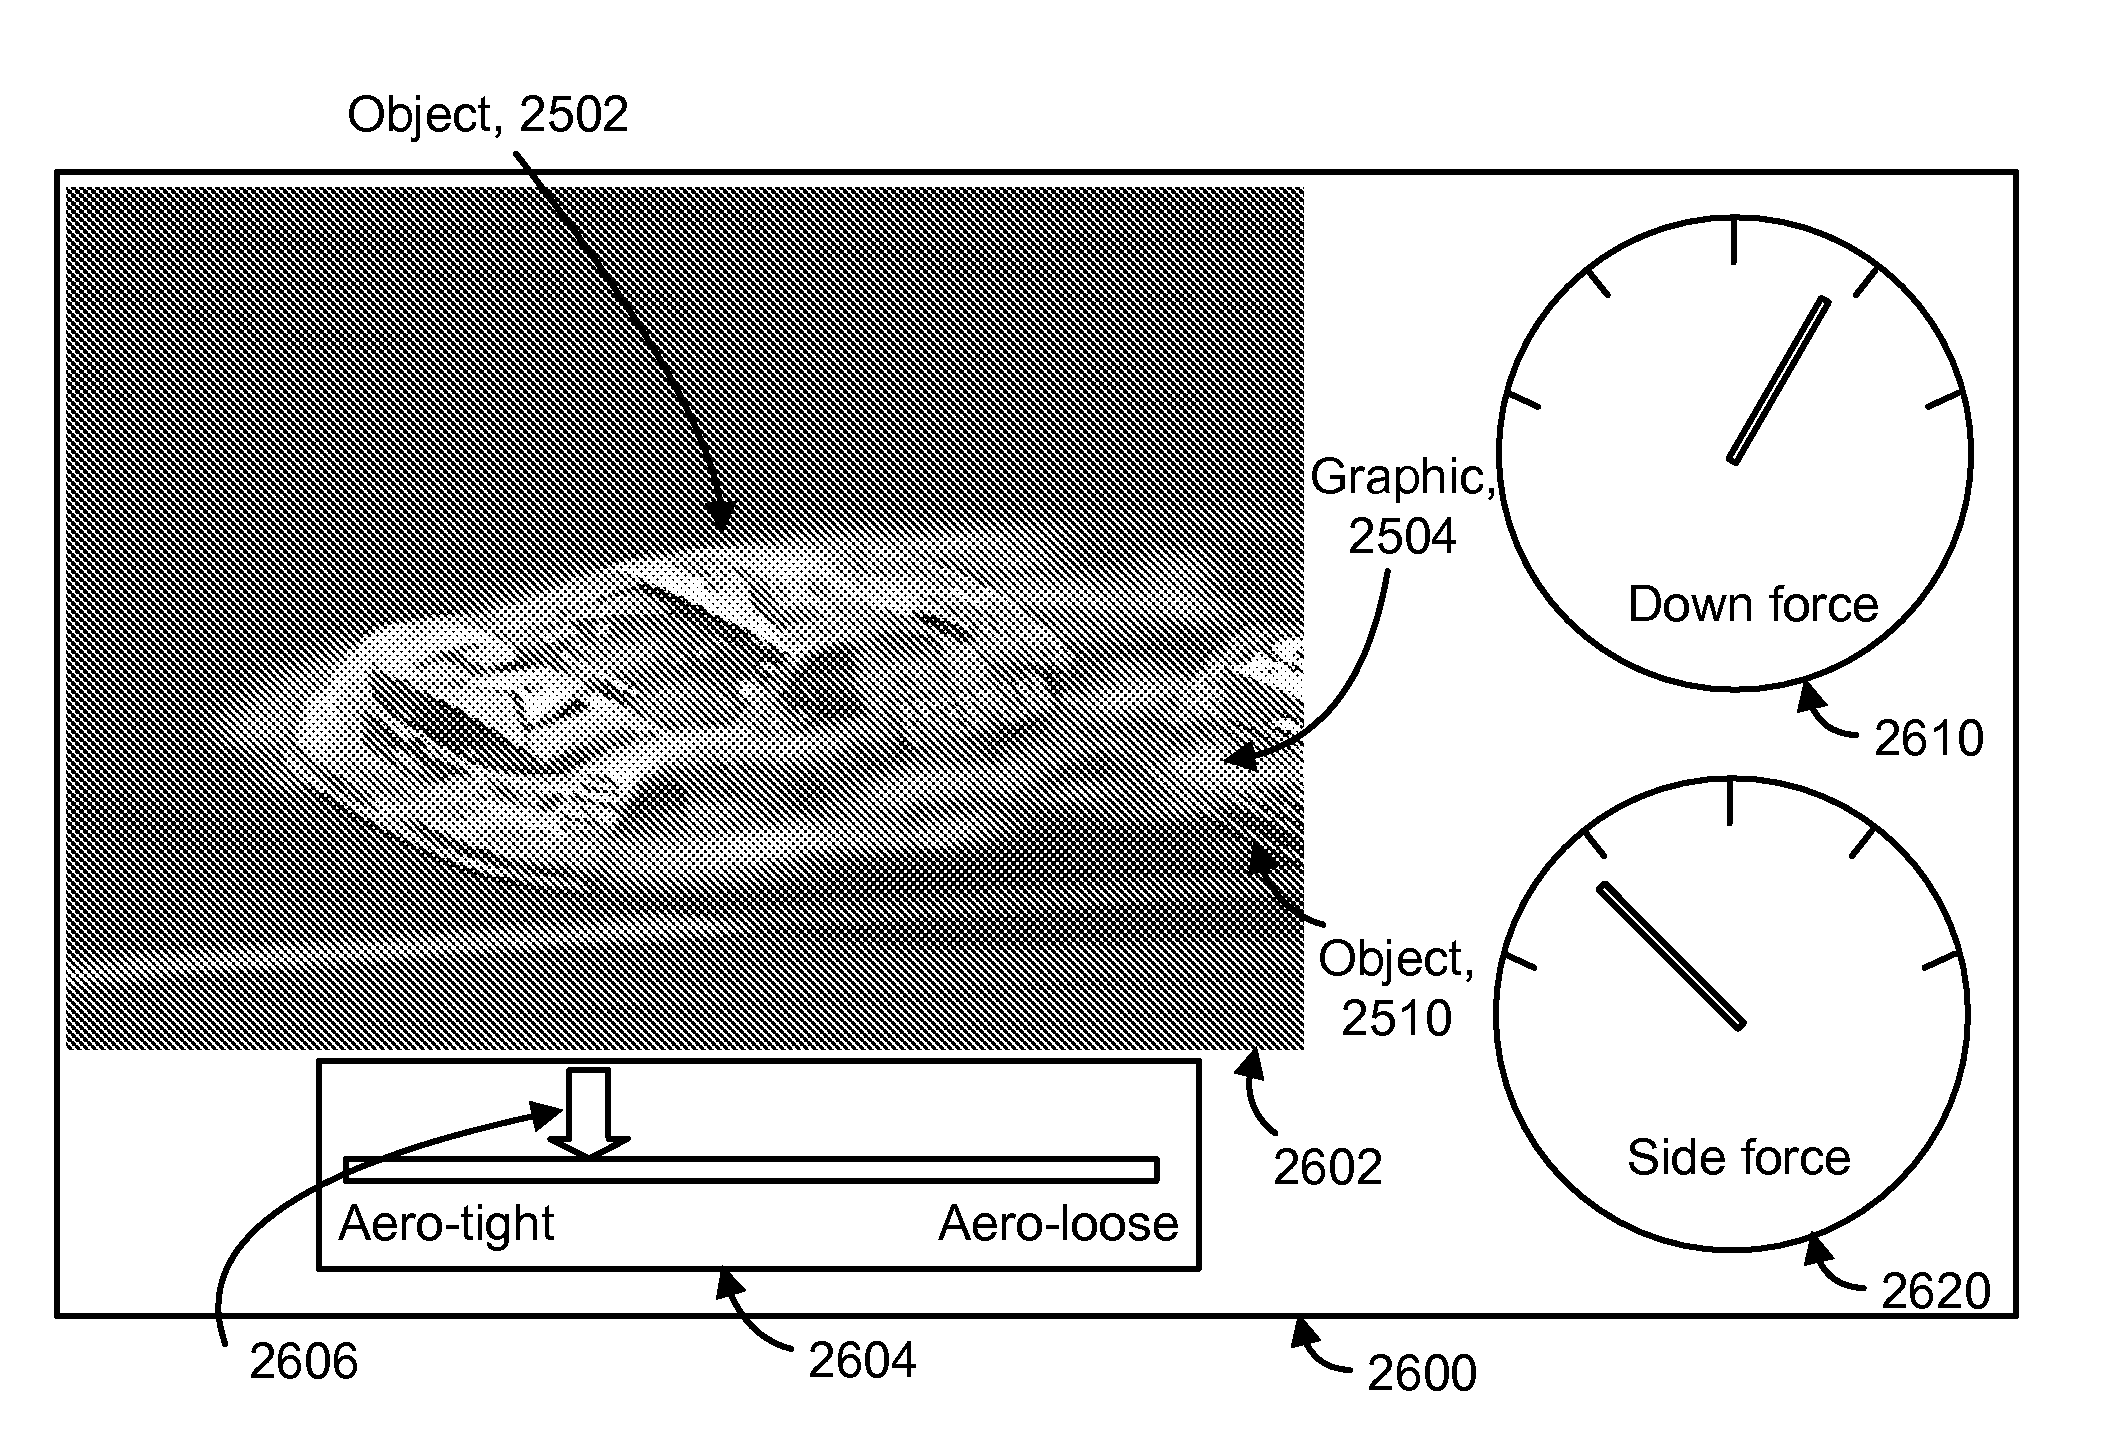 Providing graphics in images depicting aerodynamic flows and forces